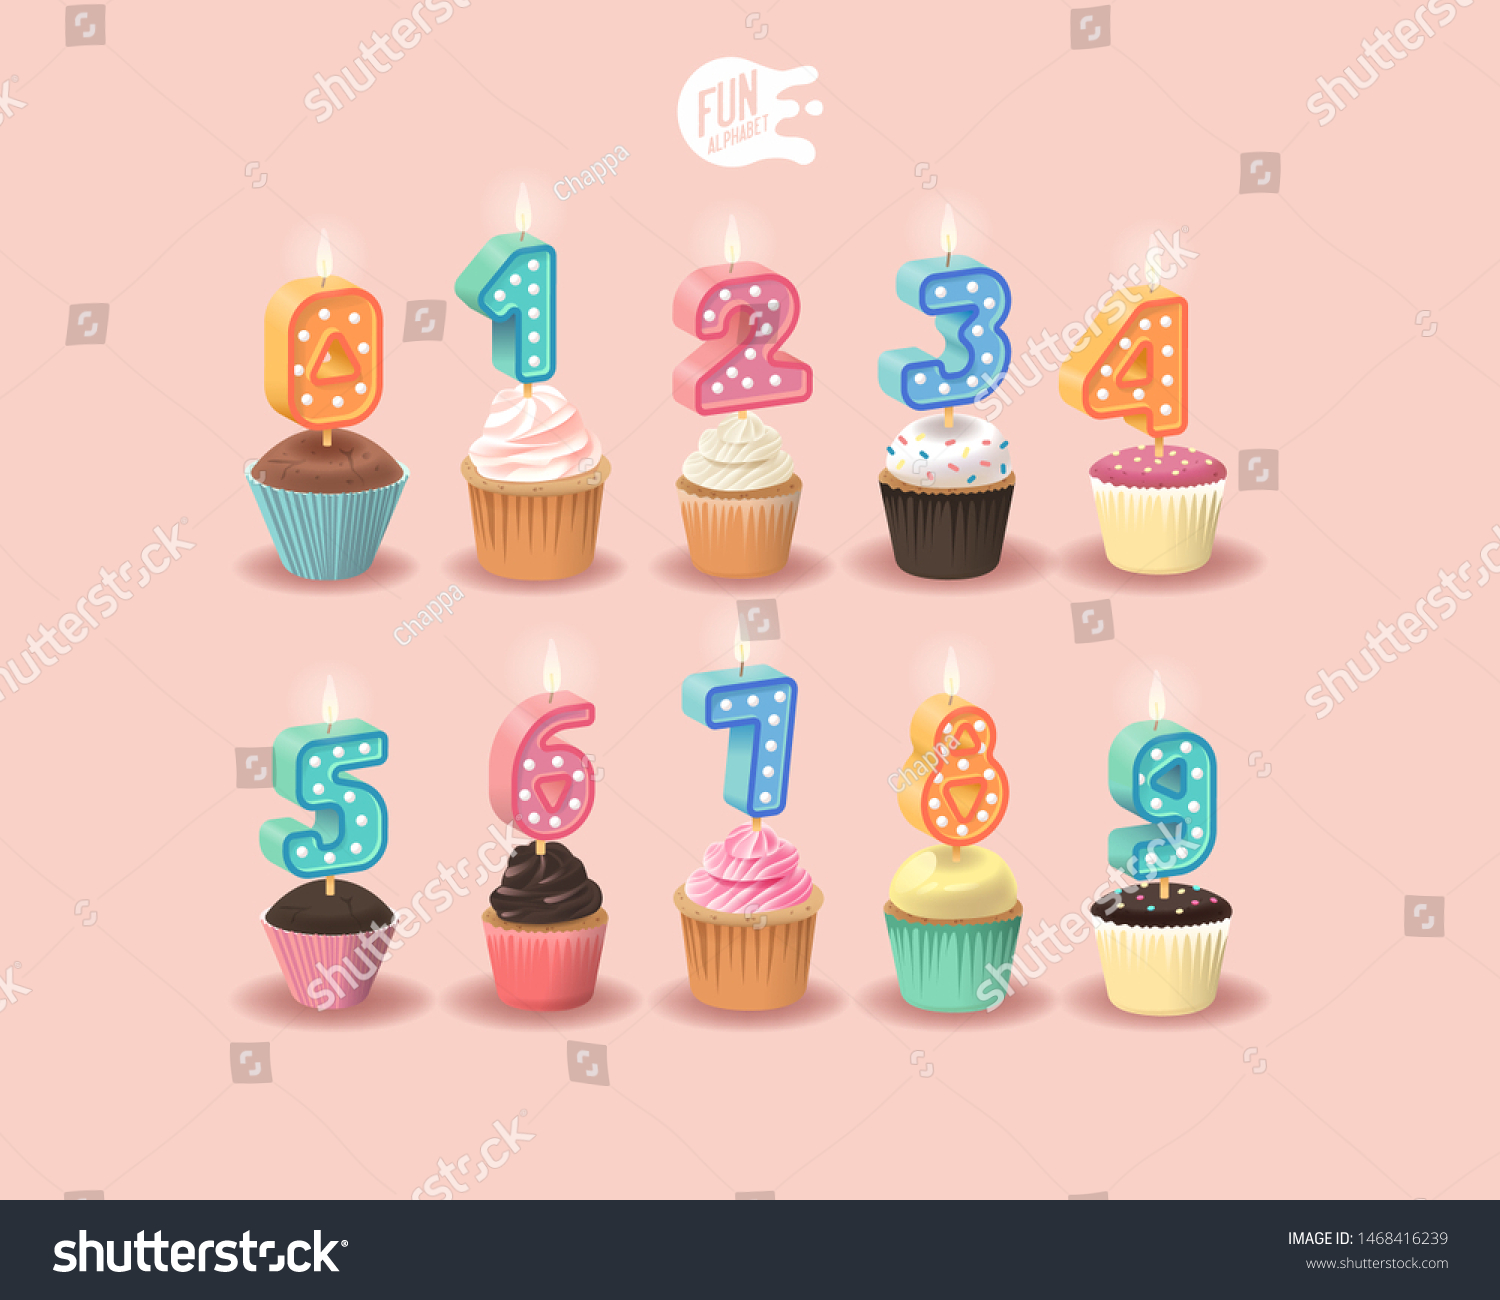 SVG of Candle 3D Sweet Numbers On A Pink Background. Set For Candy Bar. Font For Happy Birthday Celebration. Realistic Collection for Children's Party. Baby Shower. Muffin With Candle. 3D Sweet Alphabet svg